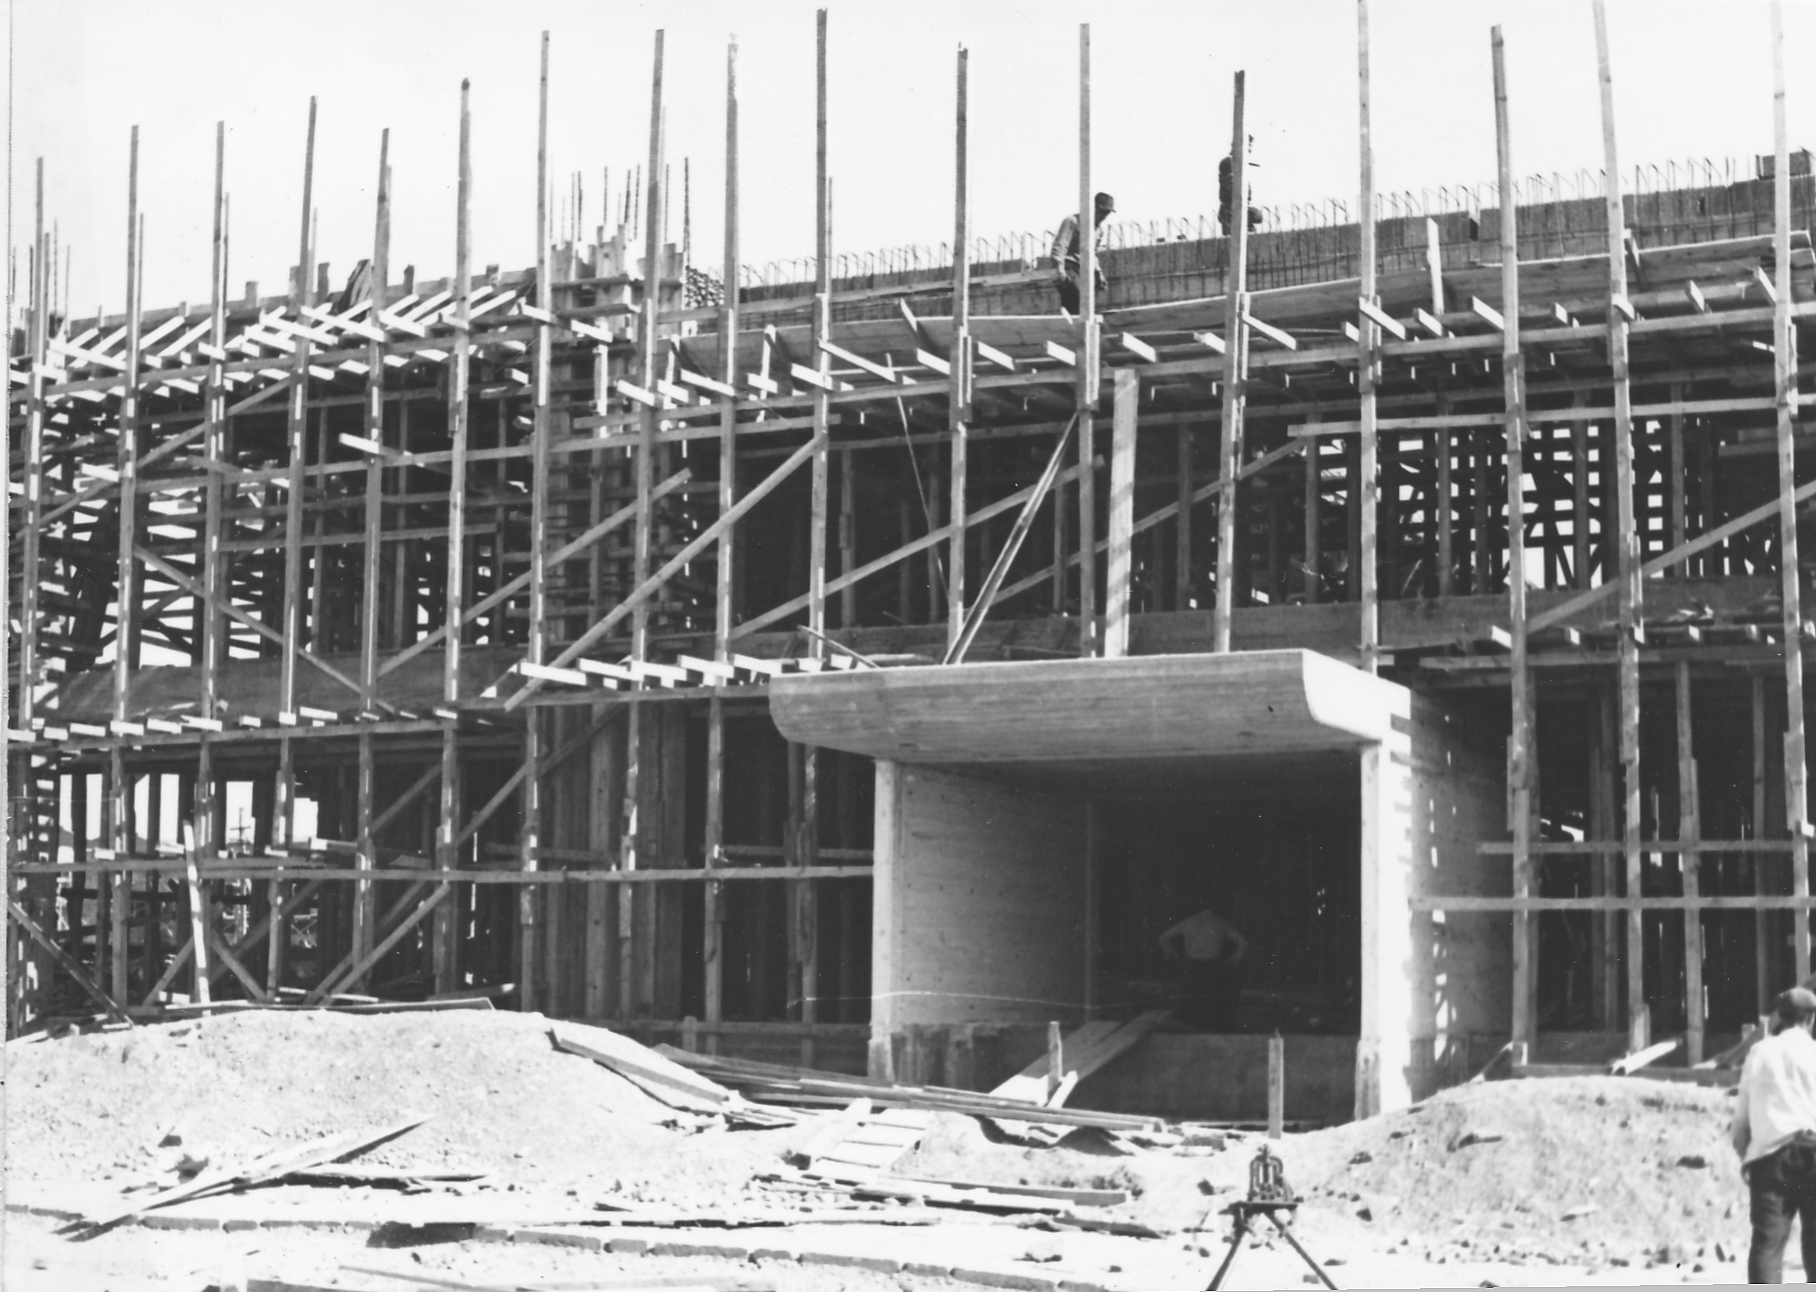 The construction of the central classrooms block (1965)